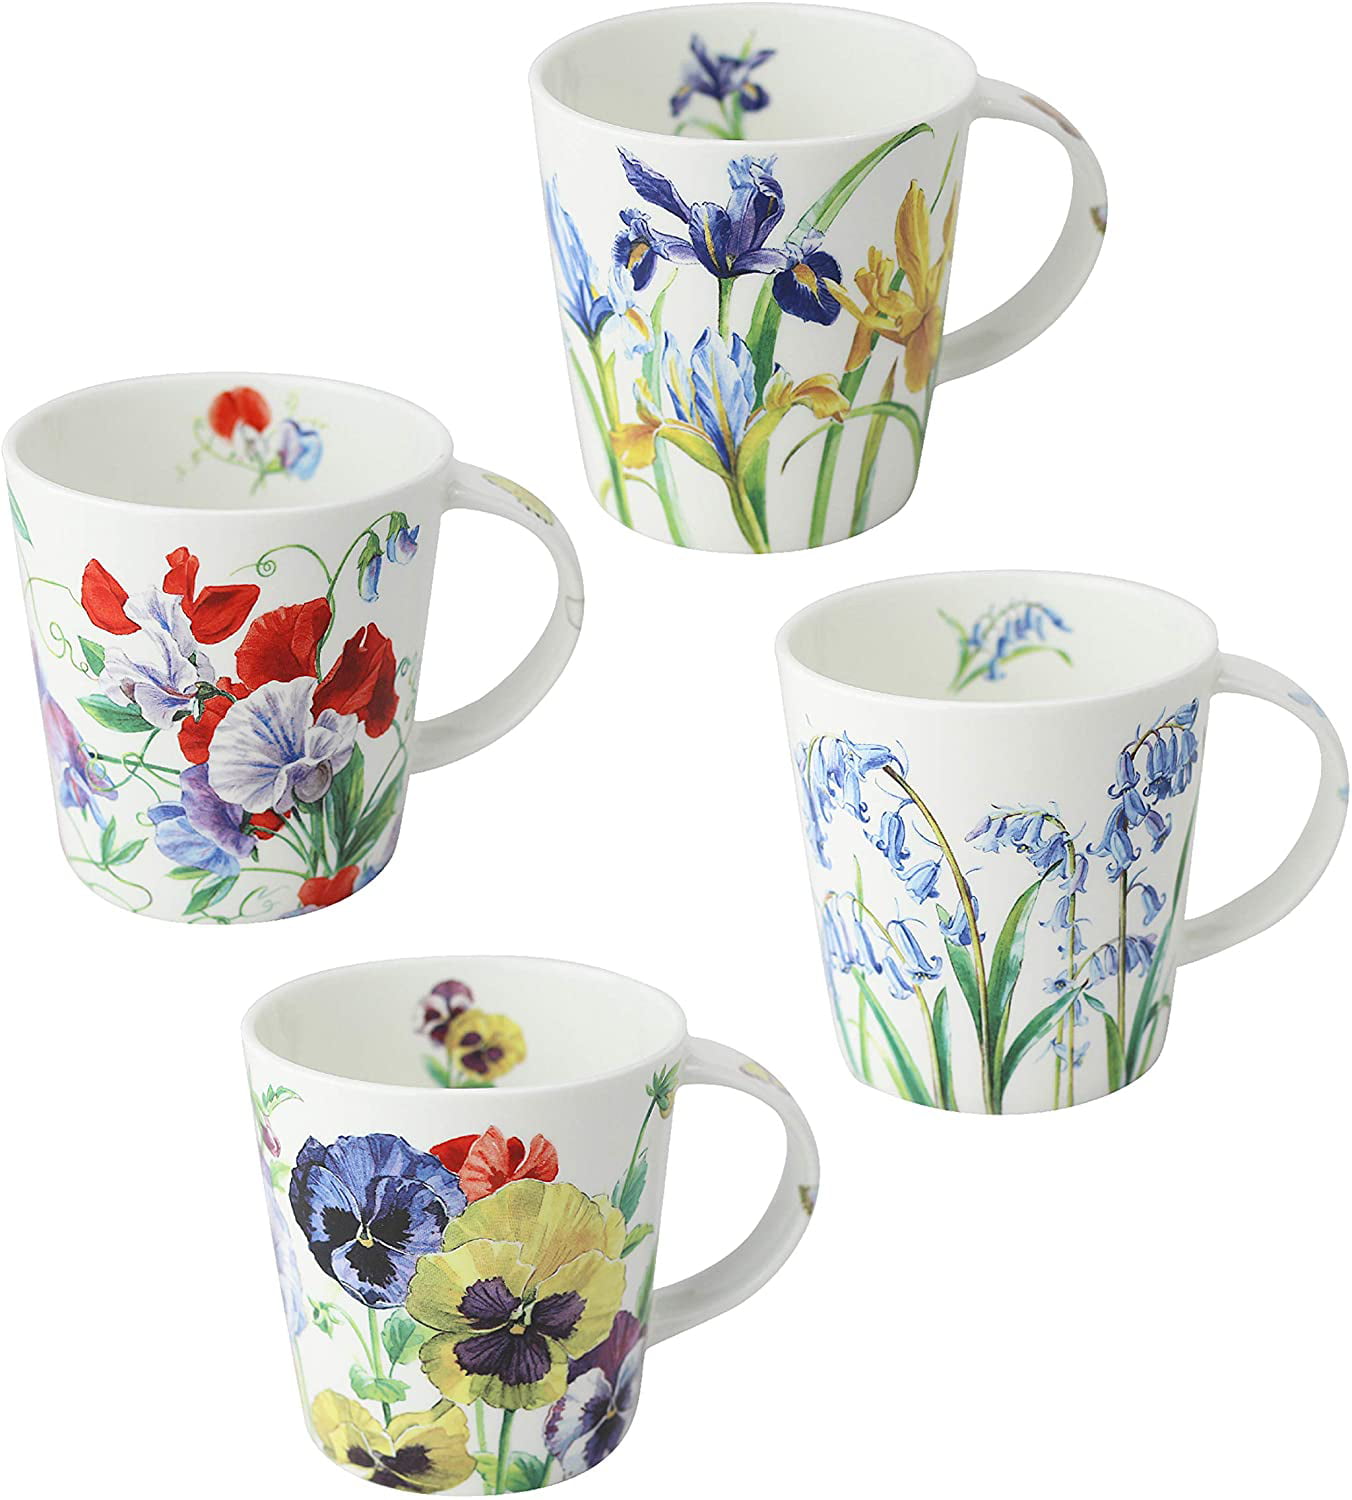 Details about   Grace's Teaware Small Poinsettia Porcelain Footed Coffee Mugs Set of Four New 